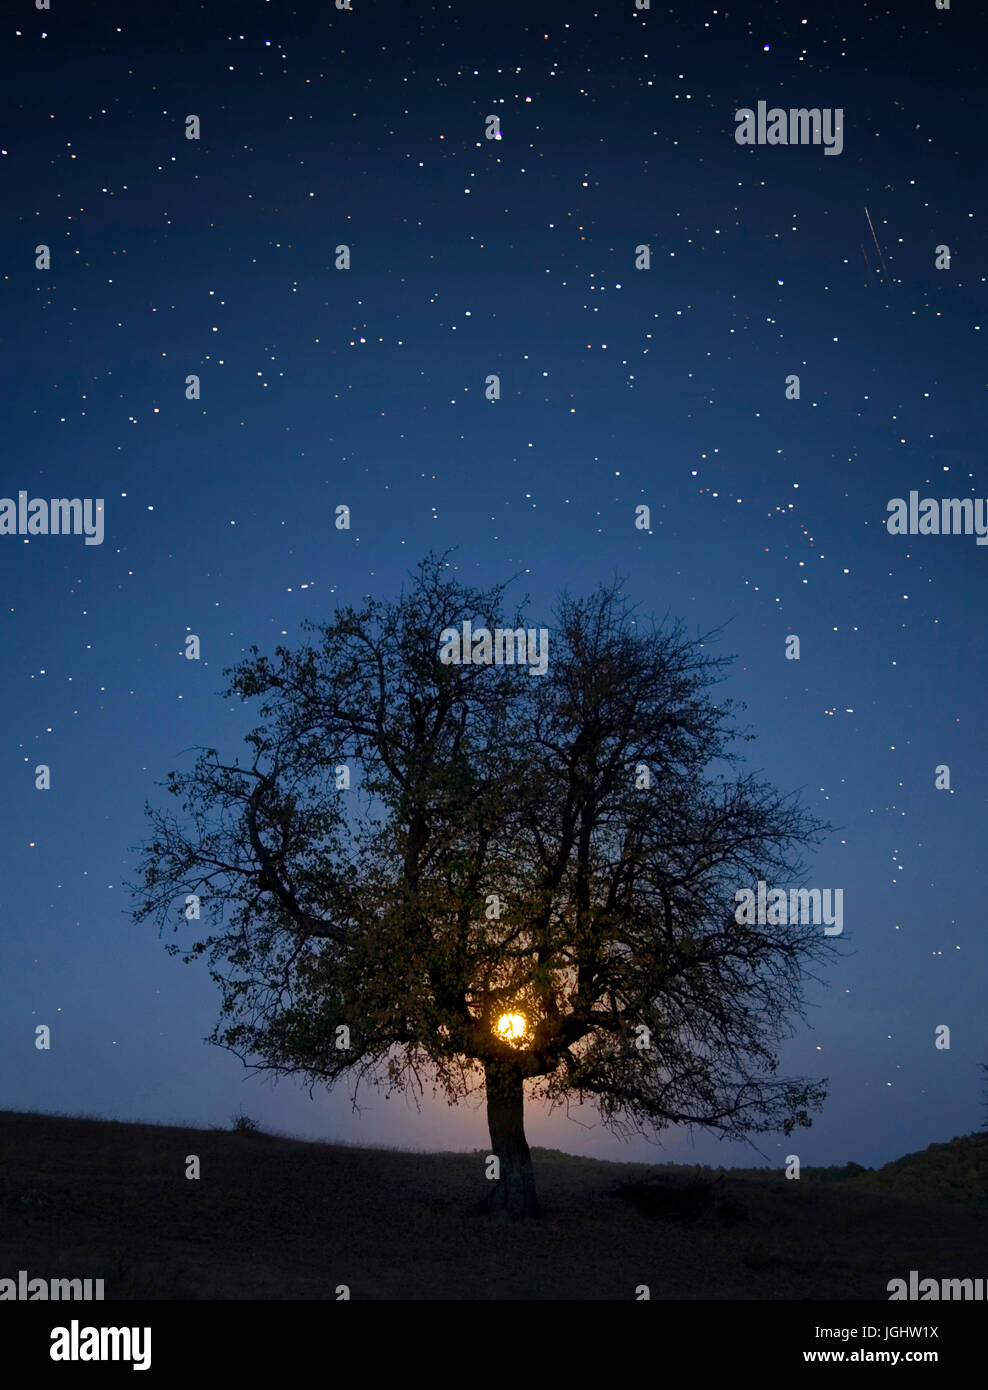 moon rise landscape with tree silhouette on hill against the starry night sky Stock Photo